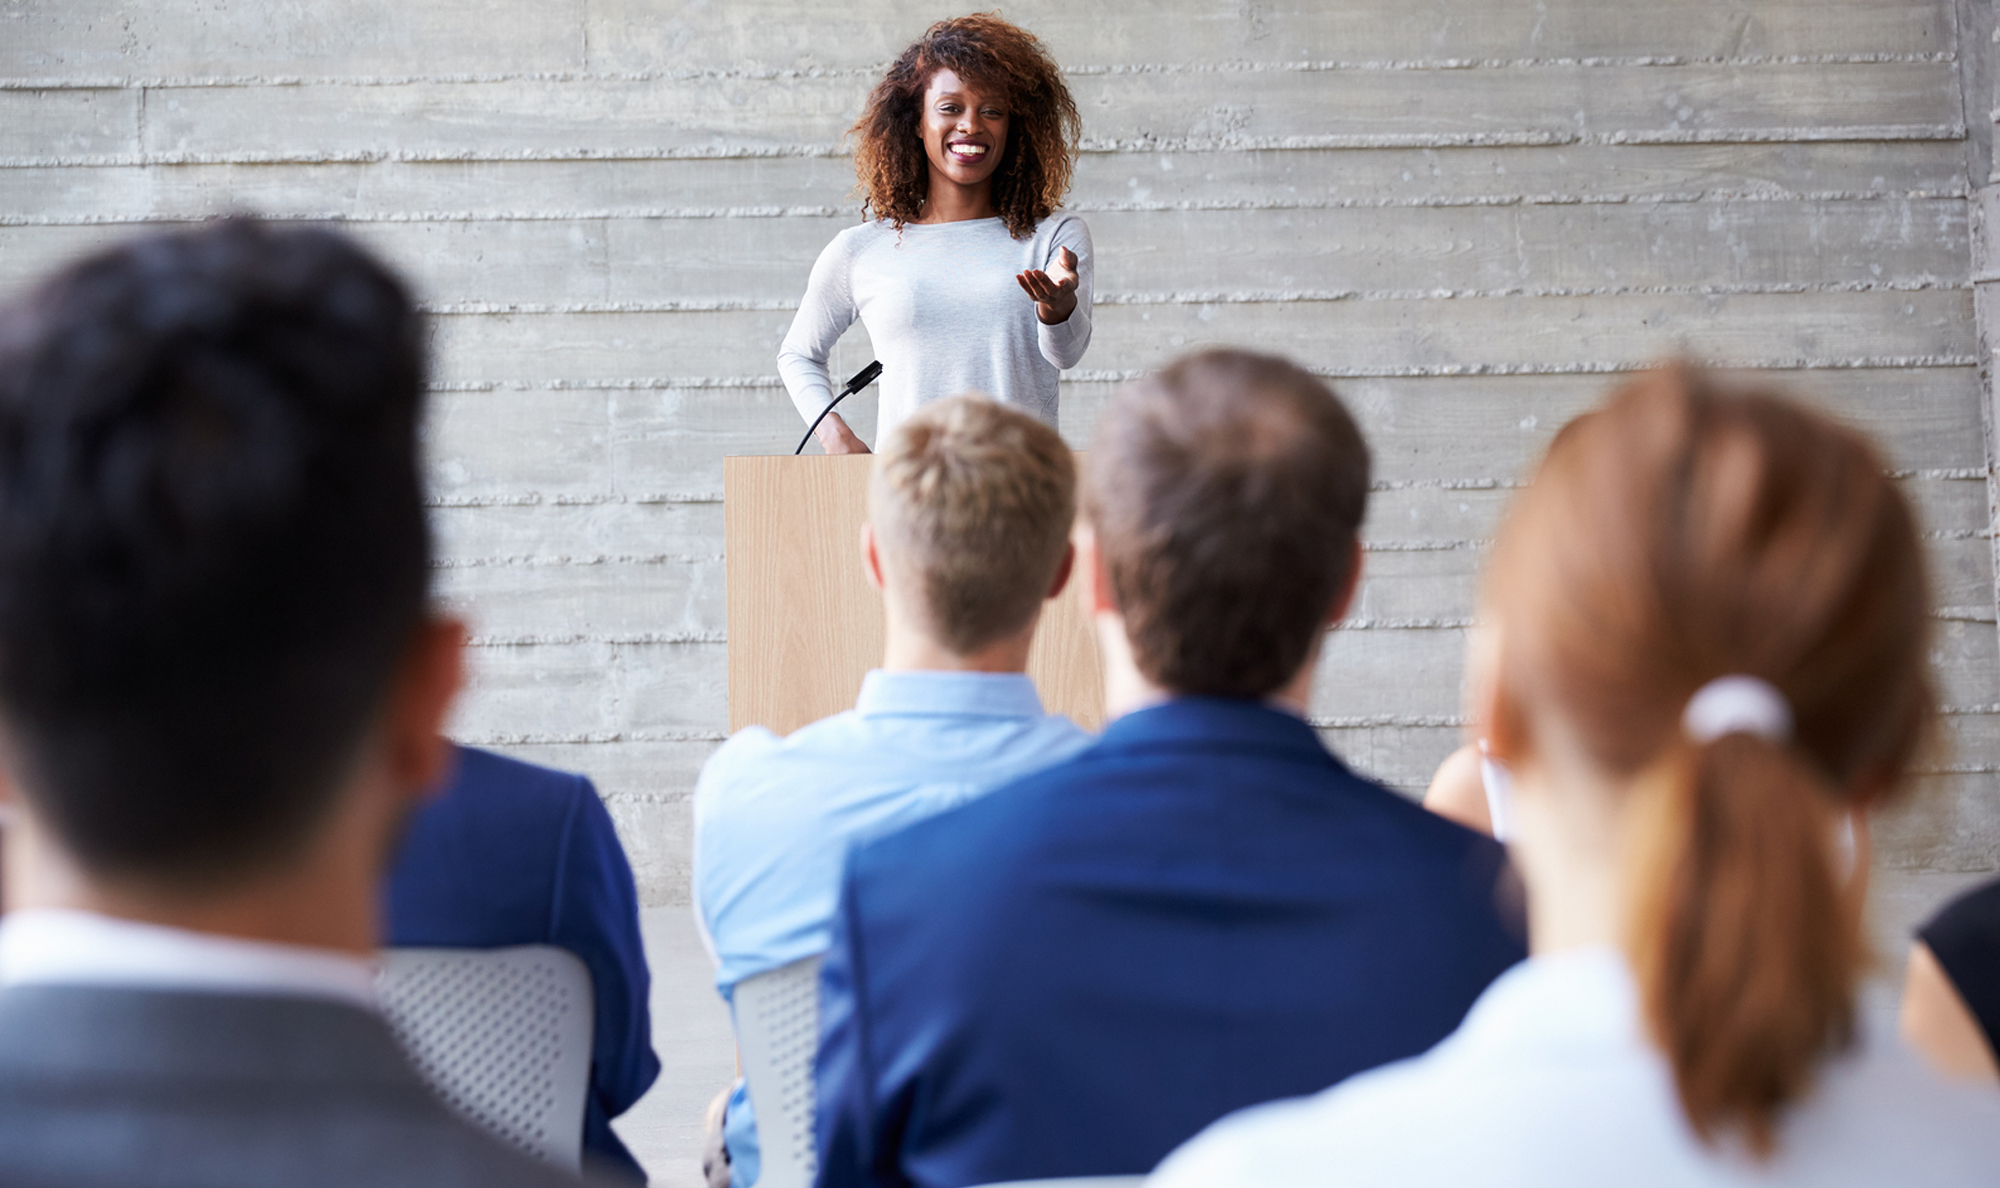 Woman standing at podium delivering speech to audience